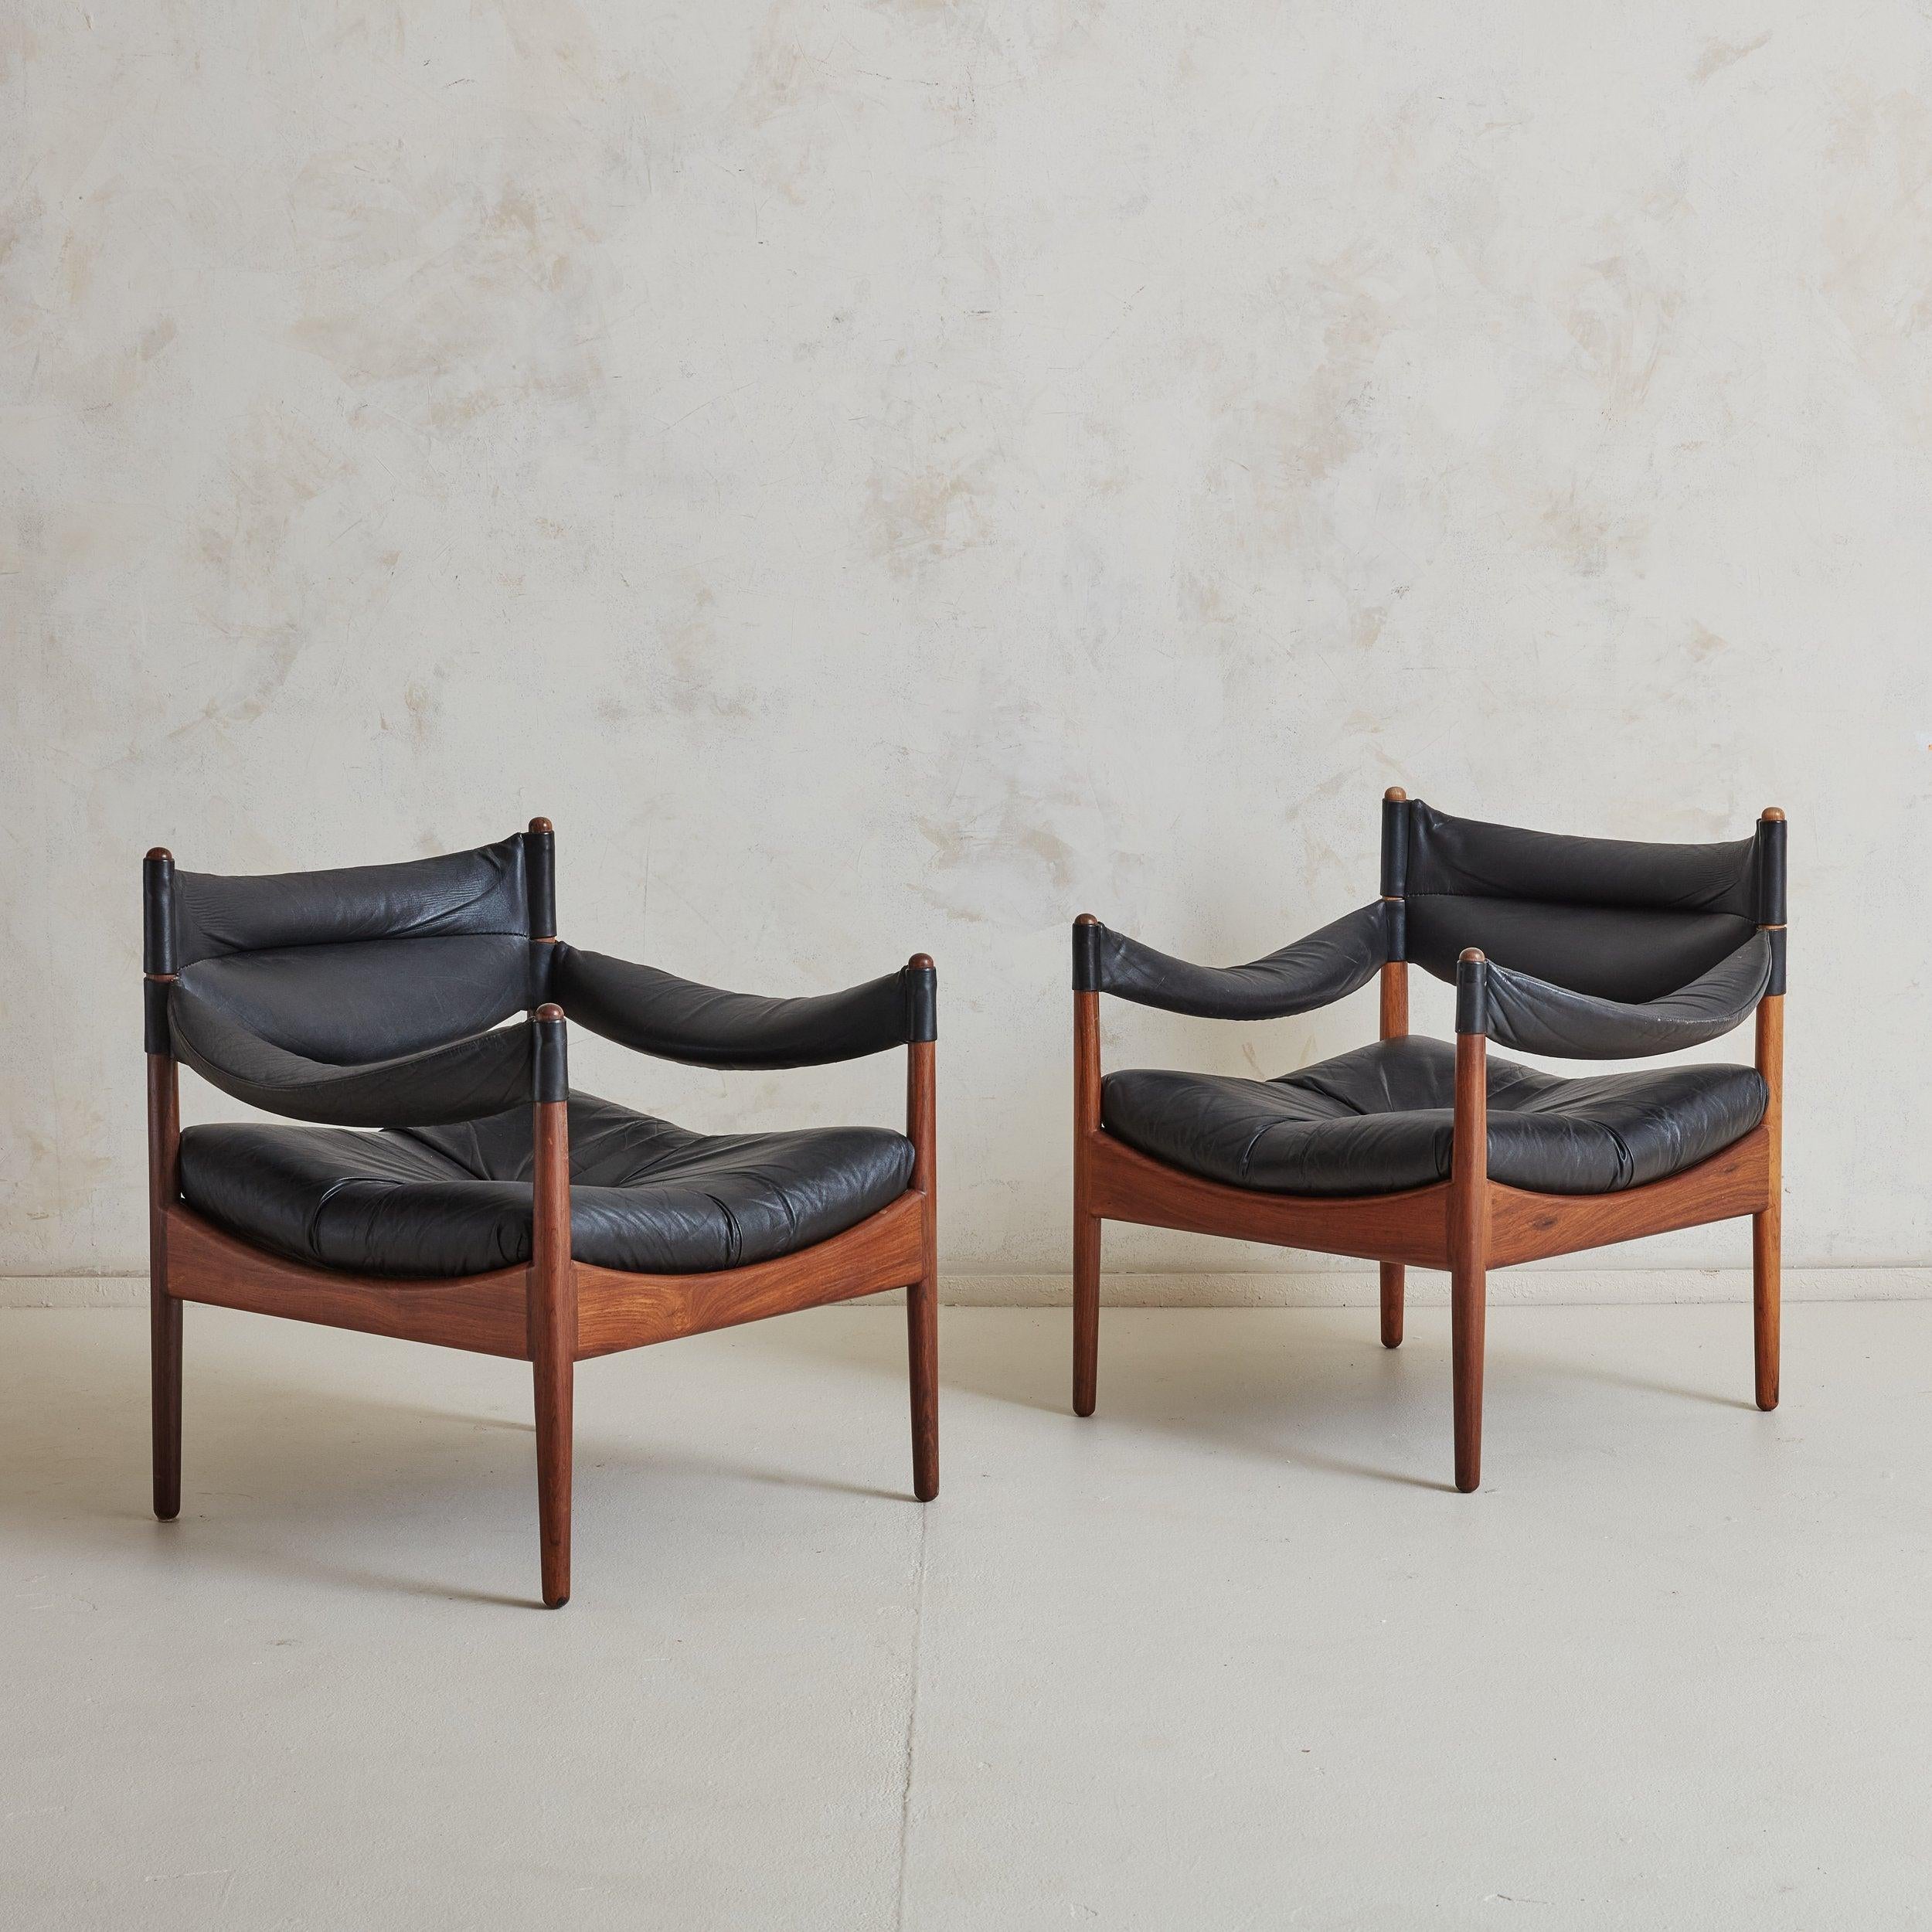 Danish Set of 2 Leather Chairs with Table by Kristian Vedel for Willadsen Møbelfabrik For Sale